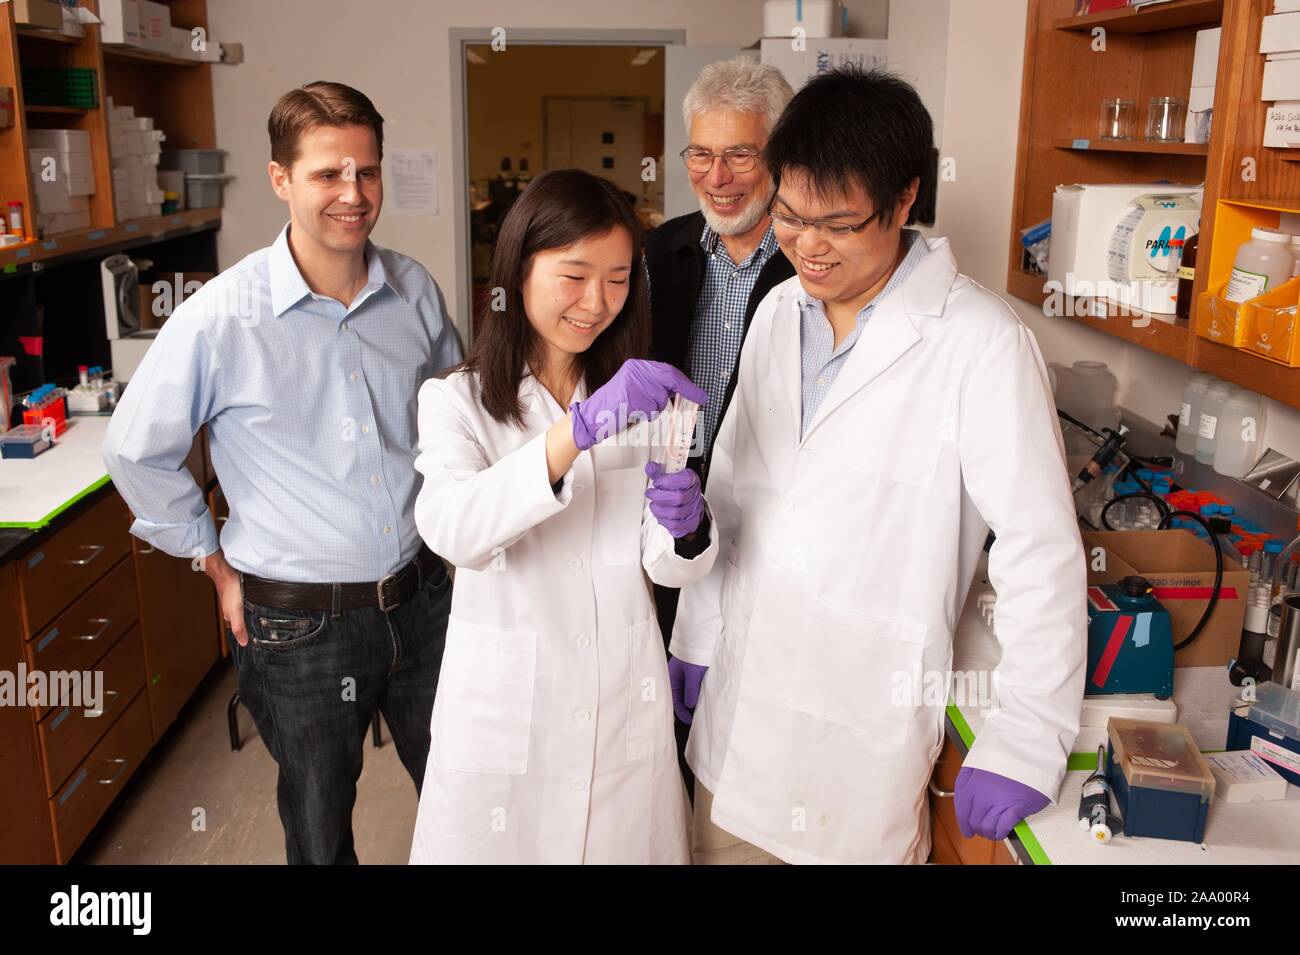 Two researchers wearing white coats and gloves manipulate a test tube in a laboratory at the Johns Hopkins University in Baltimore, Maryland, while two other researchers, including nanomedicine professor Justin Hanes (L), look on, January 30, 2009. From the Homewood Photography collection. () Stock Photo